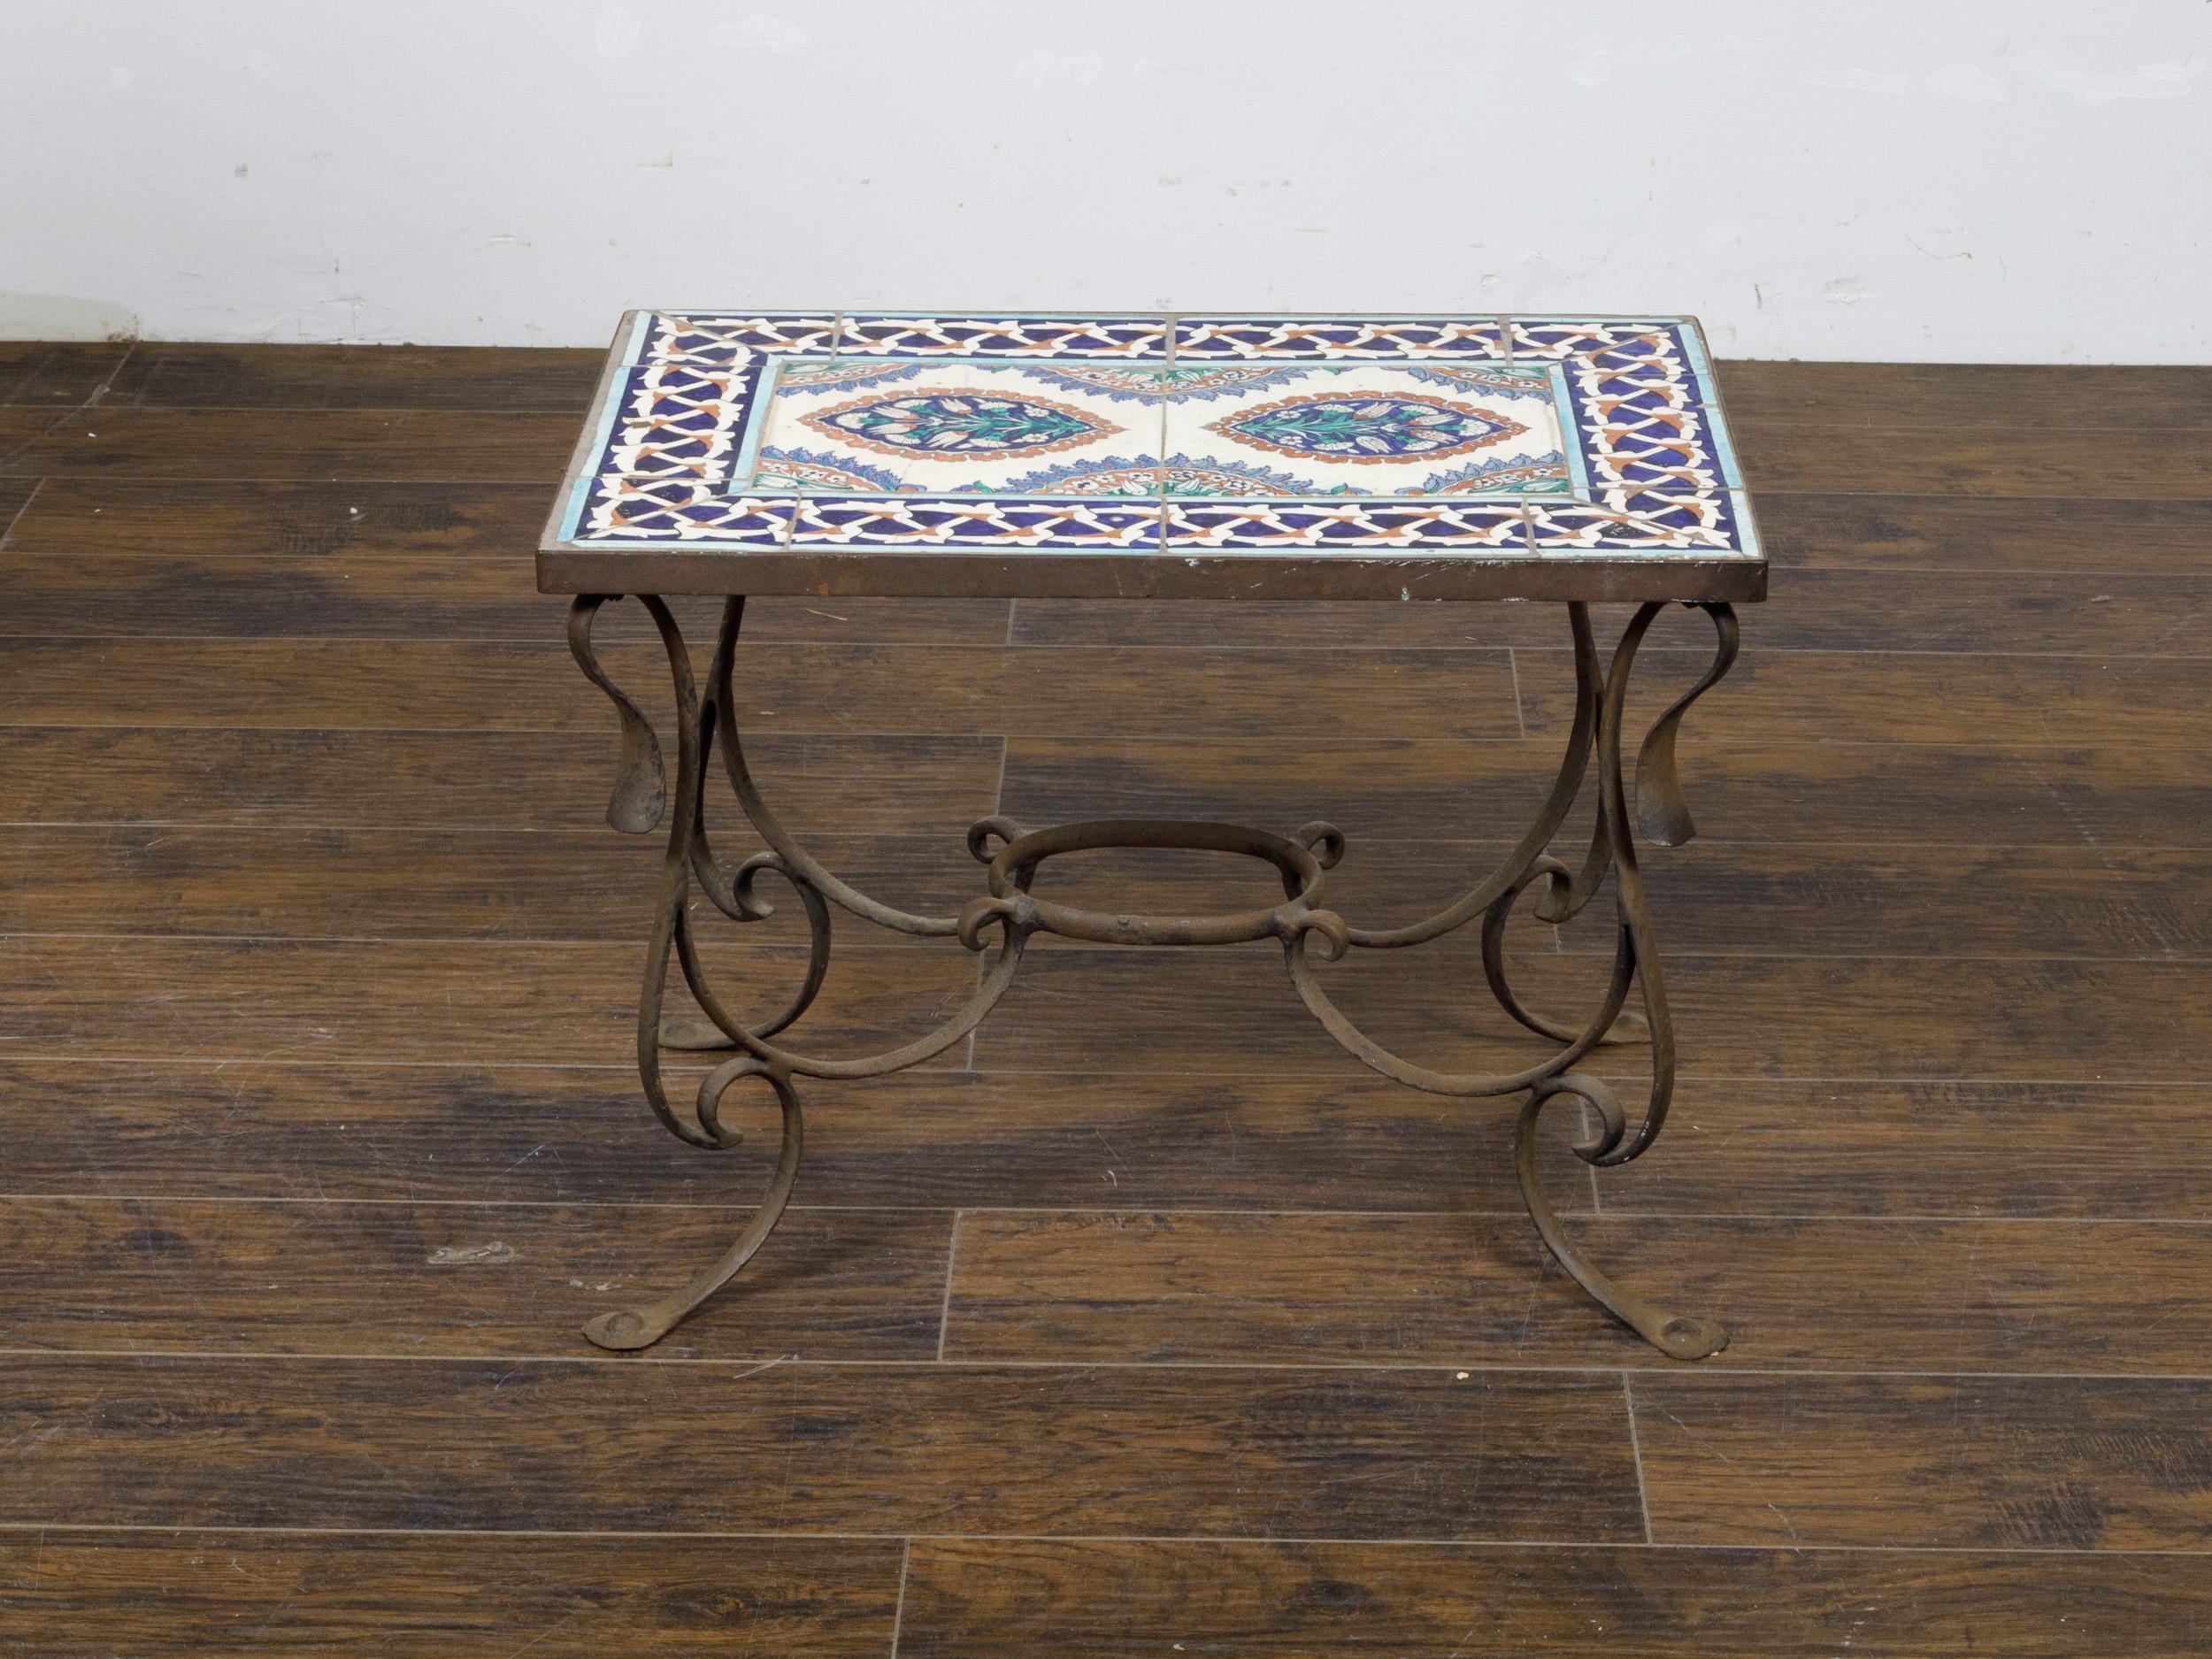 20th Century Midcentury Italian Wrought-Iron Coffee Table with Tile Top and Scrolling Base For Sale